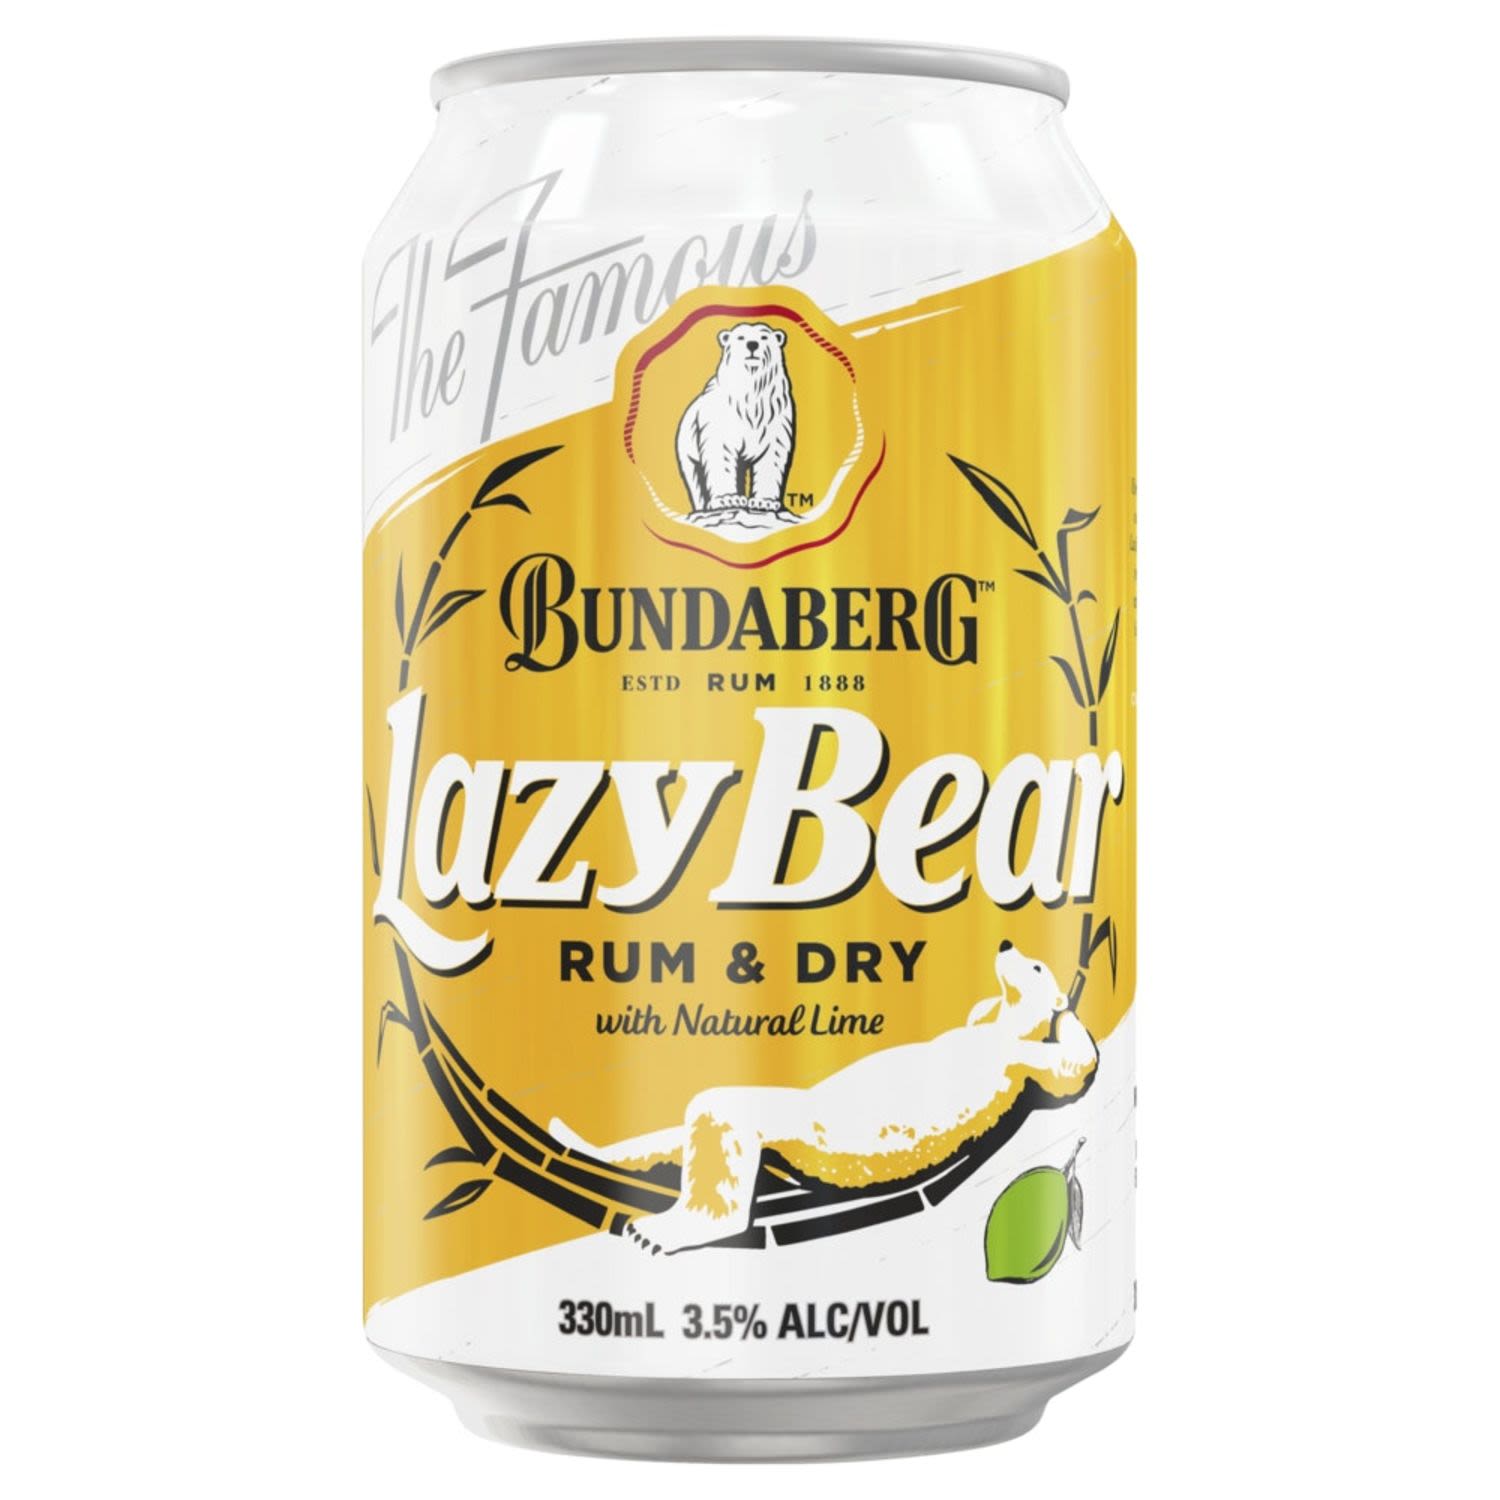 Up here in Bundaberg we believe lazy time is well earned precious time. Lazy time is that magical moment when all is at peace, you're with your mates, the world makes sense and the snags are about to burst into flames. That's why we created Bundaberg Rum Lazy Bear. Enjoy a lazy afternoon with this refreshing take on classic Bundaberg rum. Dry with a twist of natural lime, this mid strength is the perfect thirst quencher for long lazy summer days.<br /> <br />Alcohol Volume: 3.50%<br /><br />Pack Format: Can<br /><br />Standard Drinks: 1</br /><br />Pack Type: Can<br />